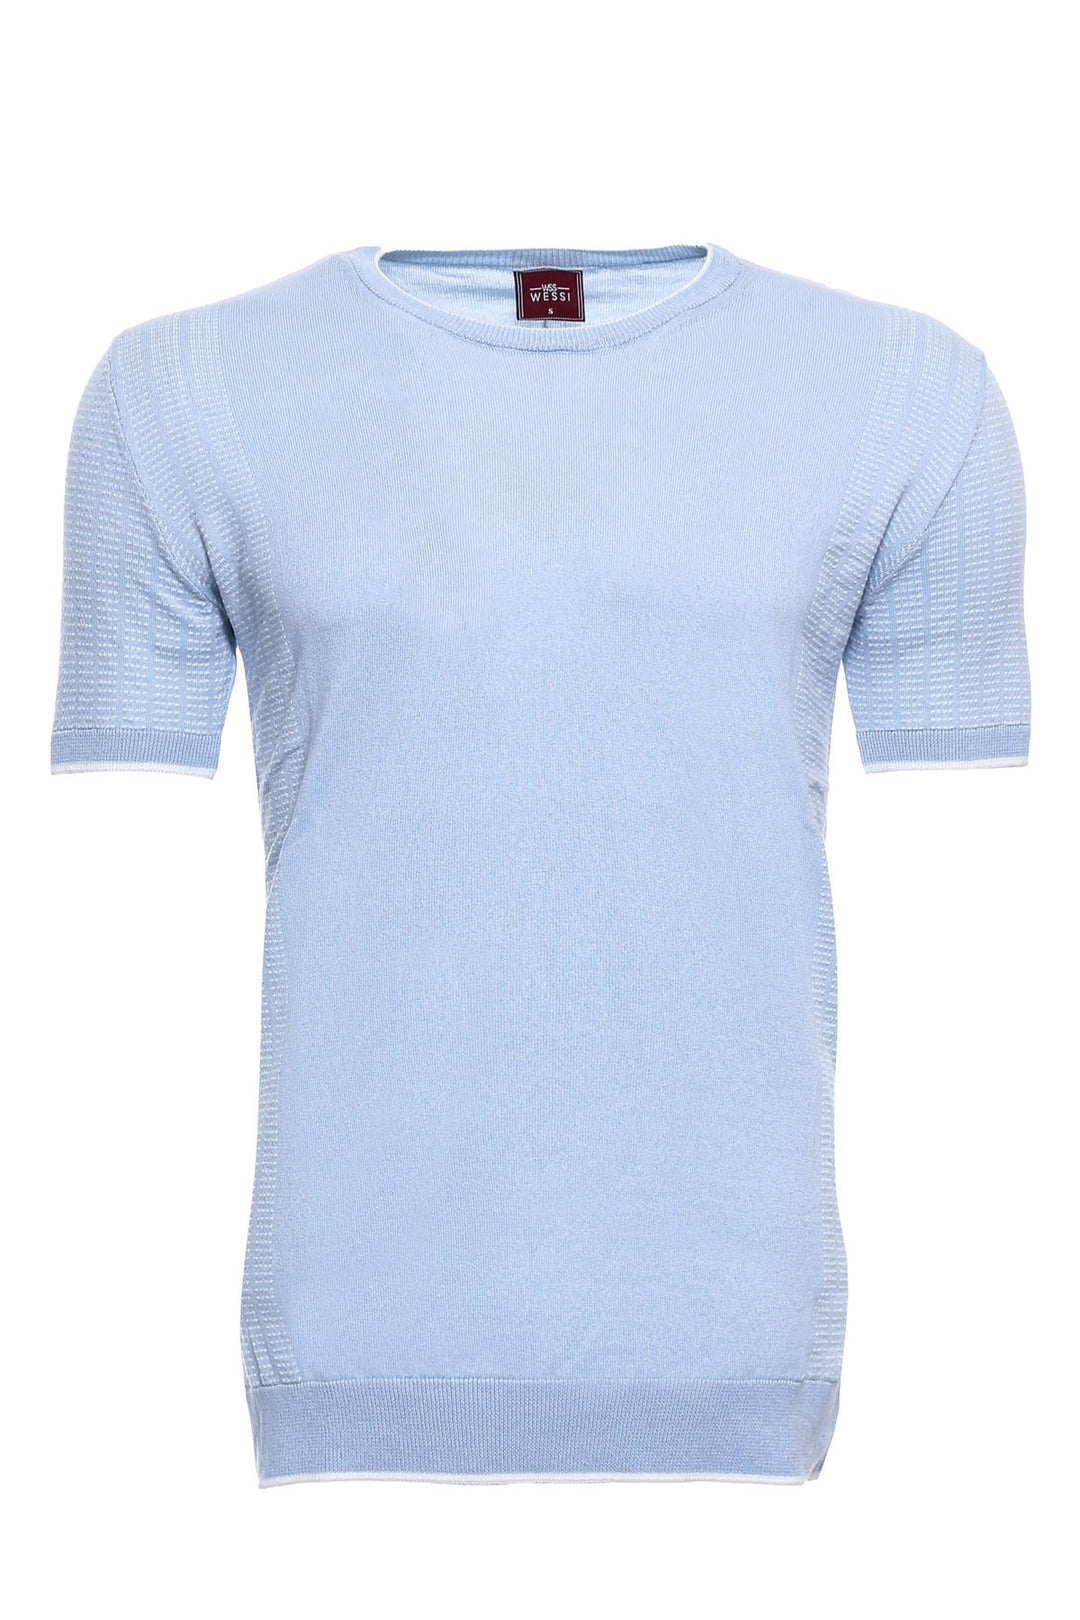 Circle Neck Patterned Blue Knitted T-Shirt - Wessi